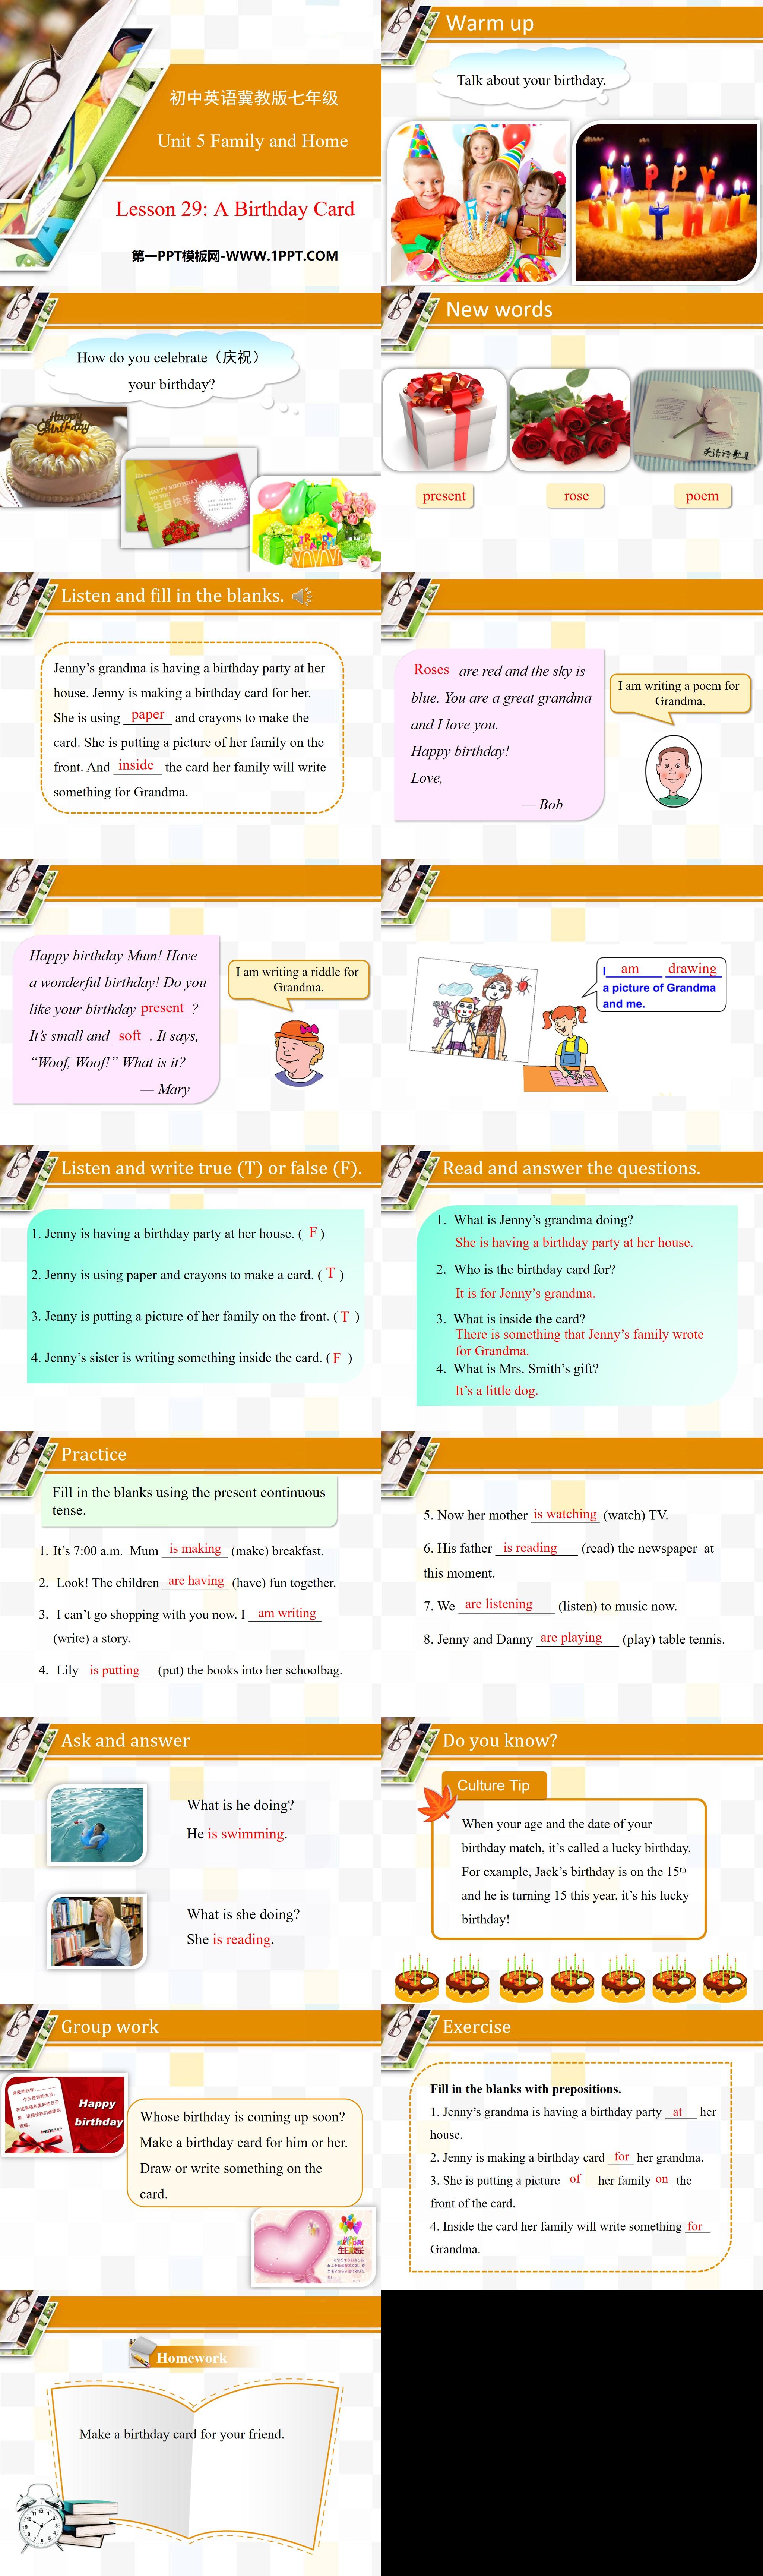 《A Birthday Card》Family and Home PPT
（2）